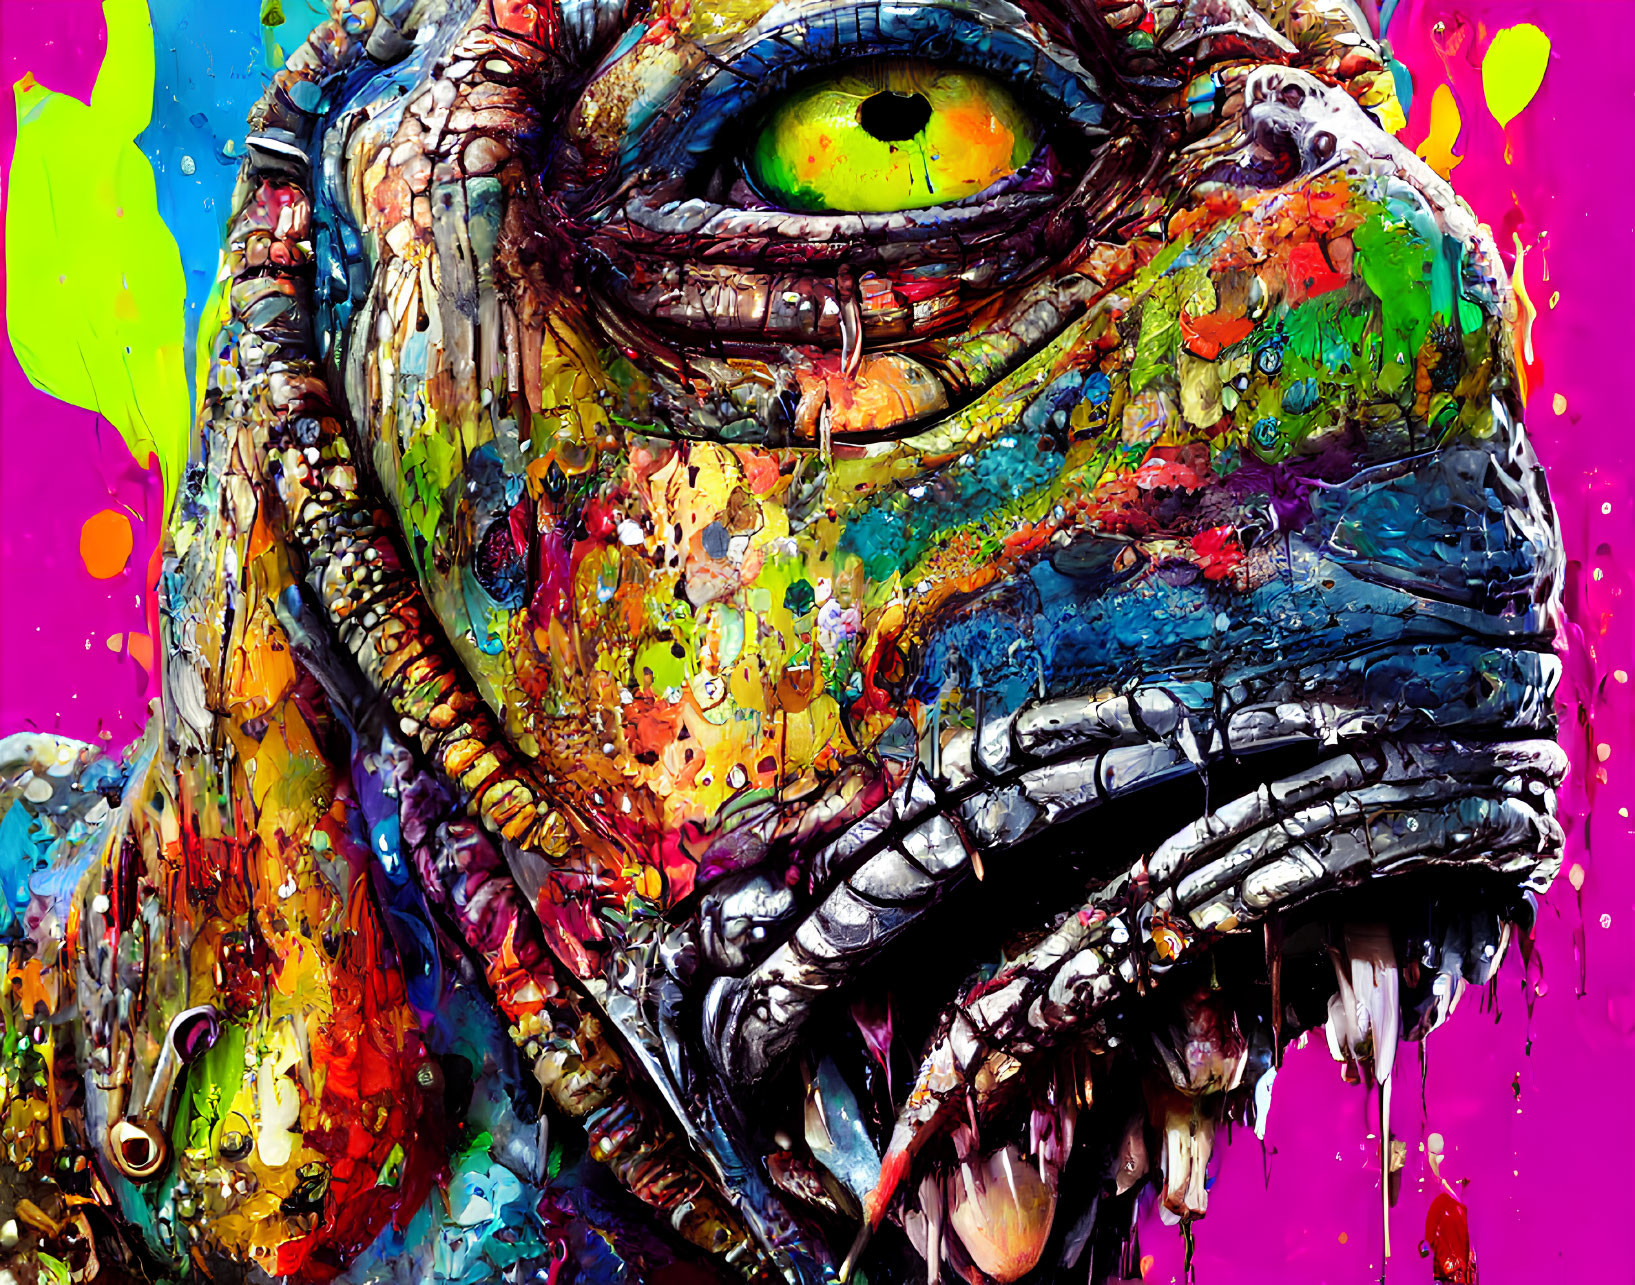 Detailed close-up of colorful creature's head with sharp teeth and eye on paint-splattered background